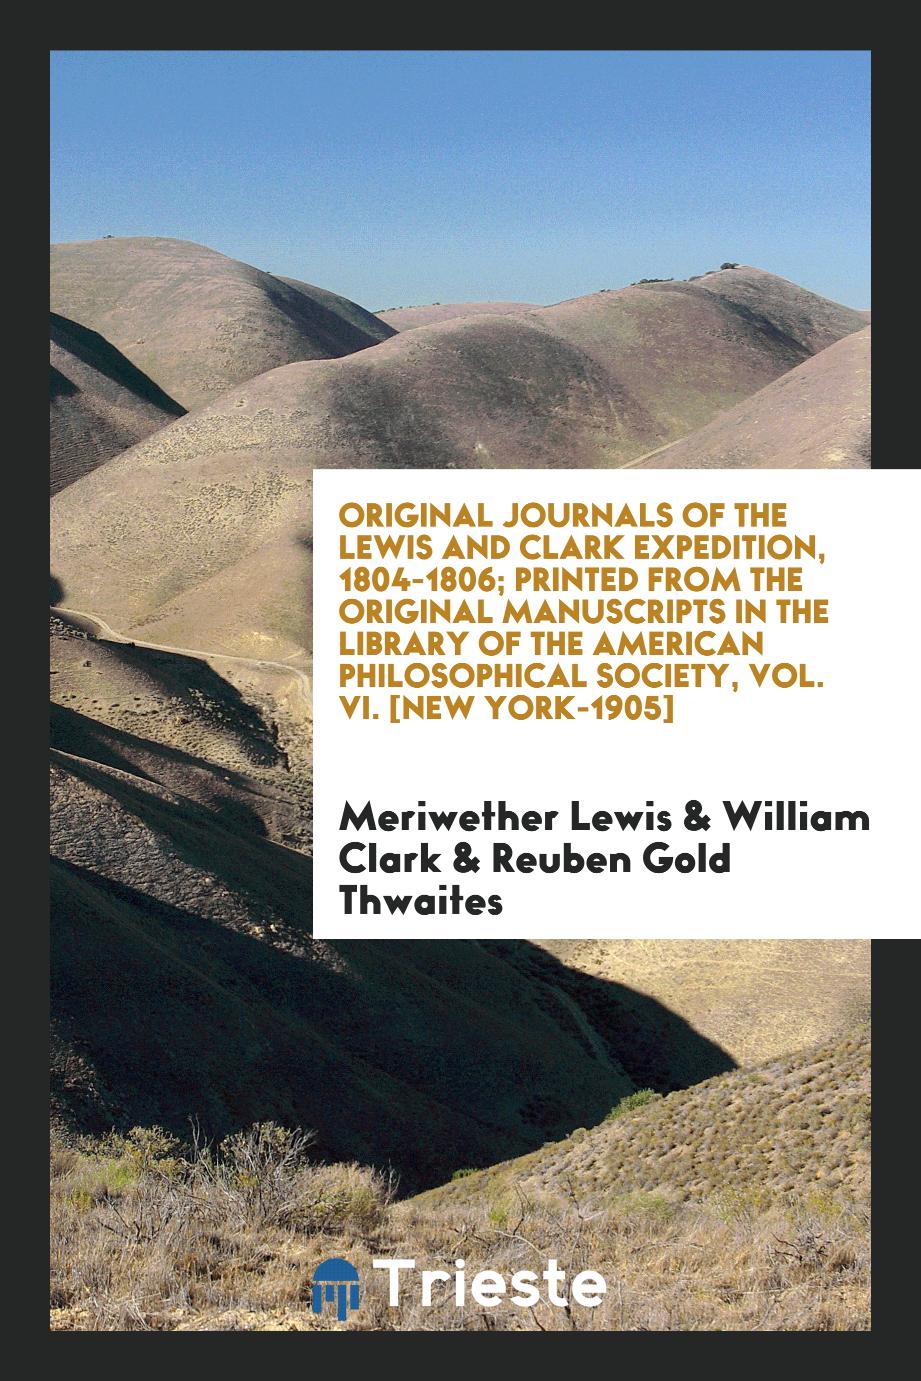 Original Journals of the Lewis and Clark Expedition, 1804-1806; Printed from the Original Manuscripts in the Library of the American Philosophical Society, Vol. VI. [New York-1905]